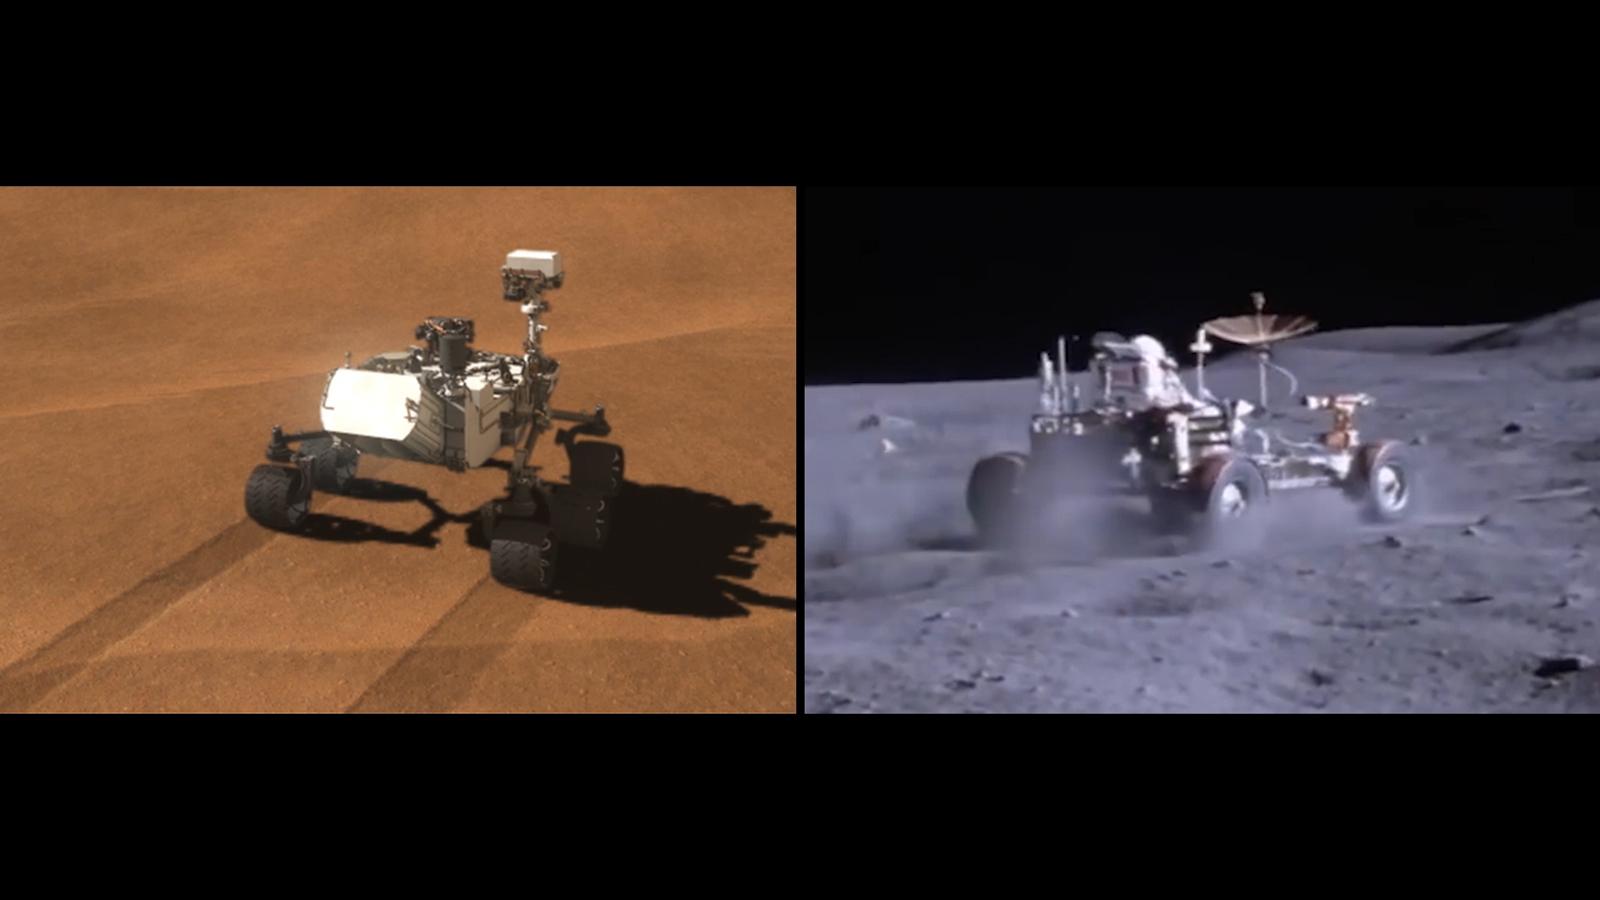 space buggy on the moon